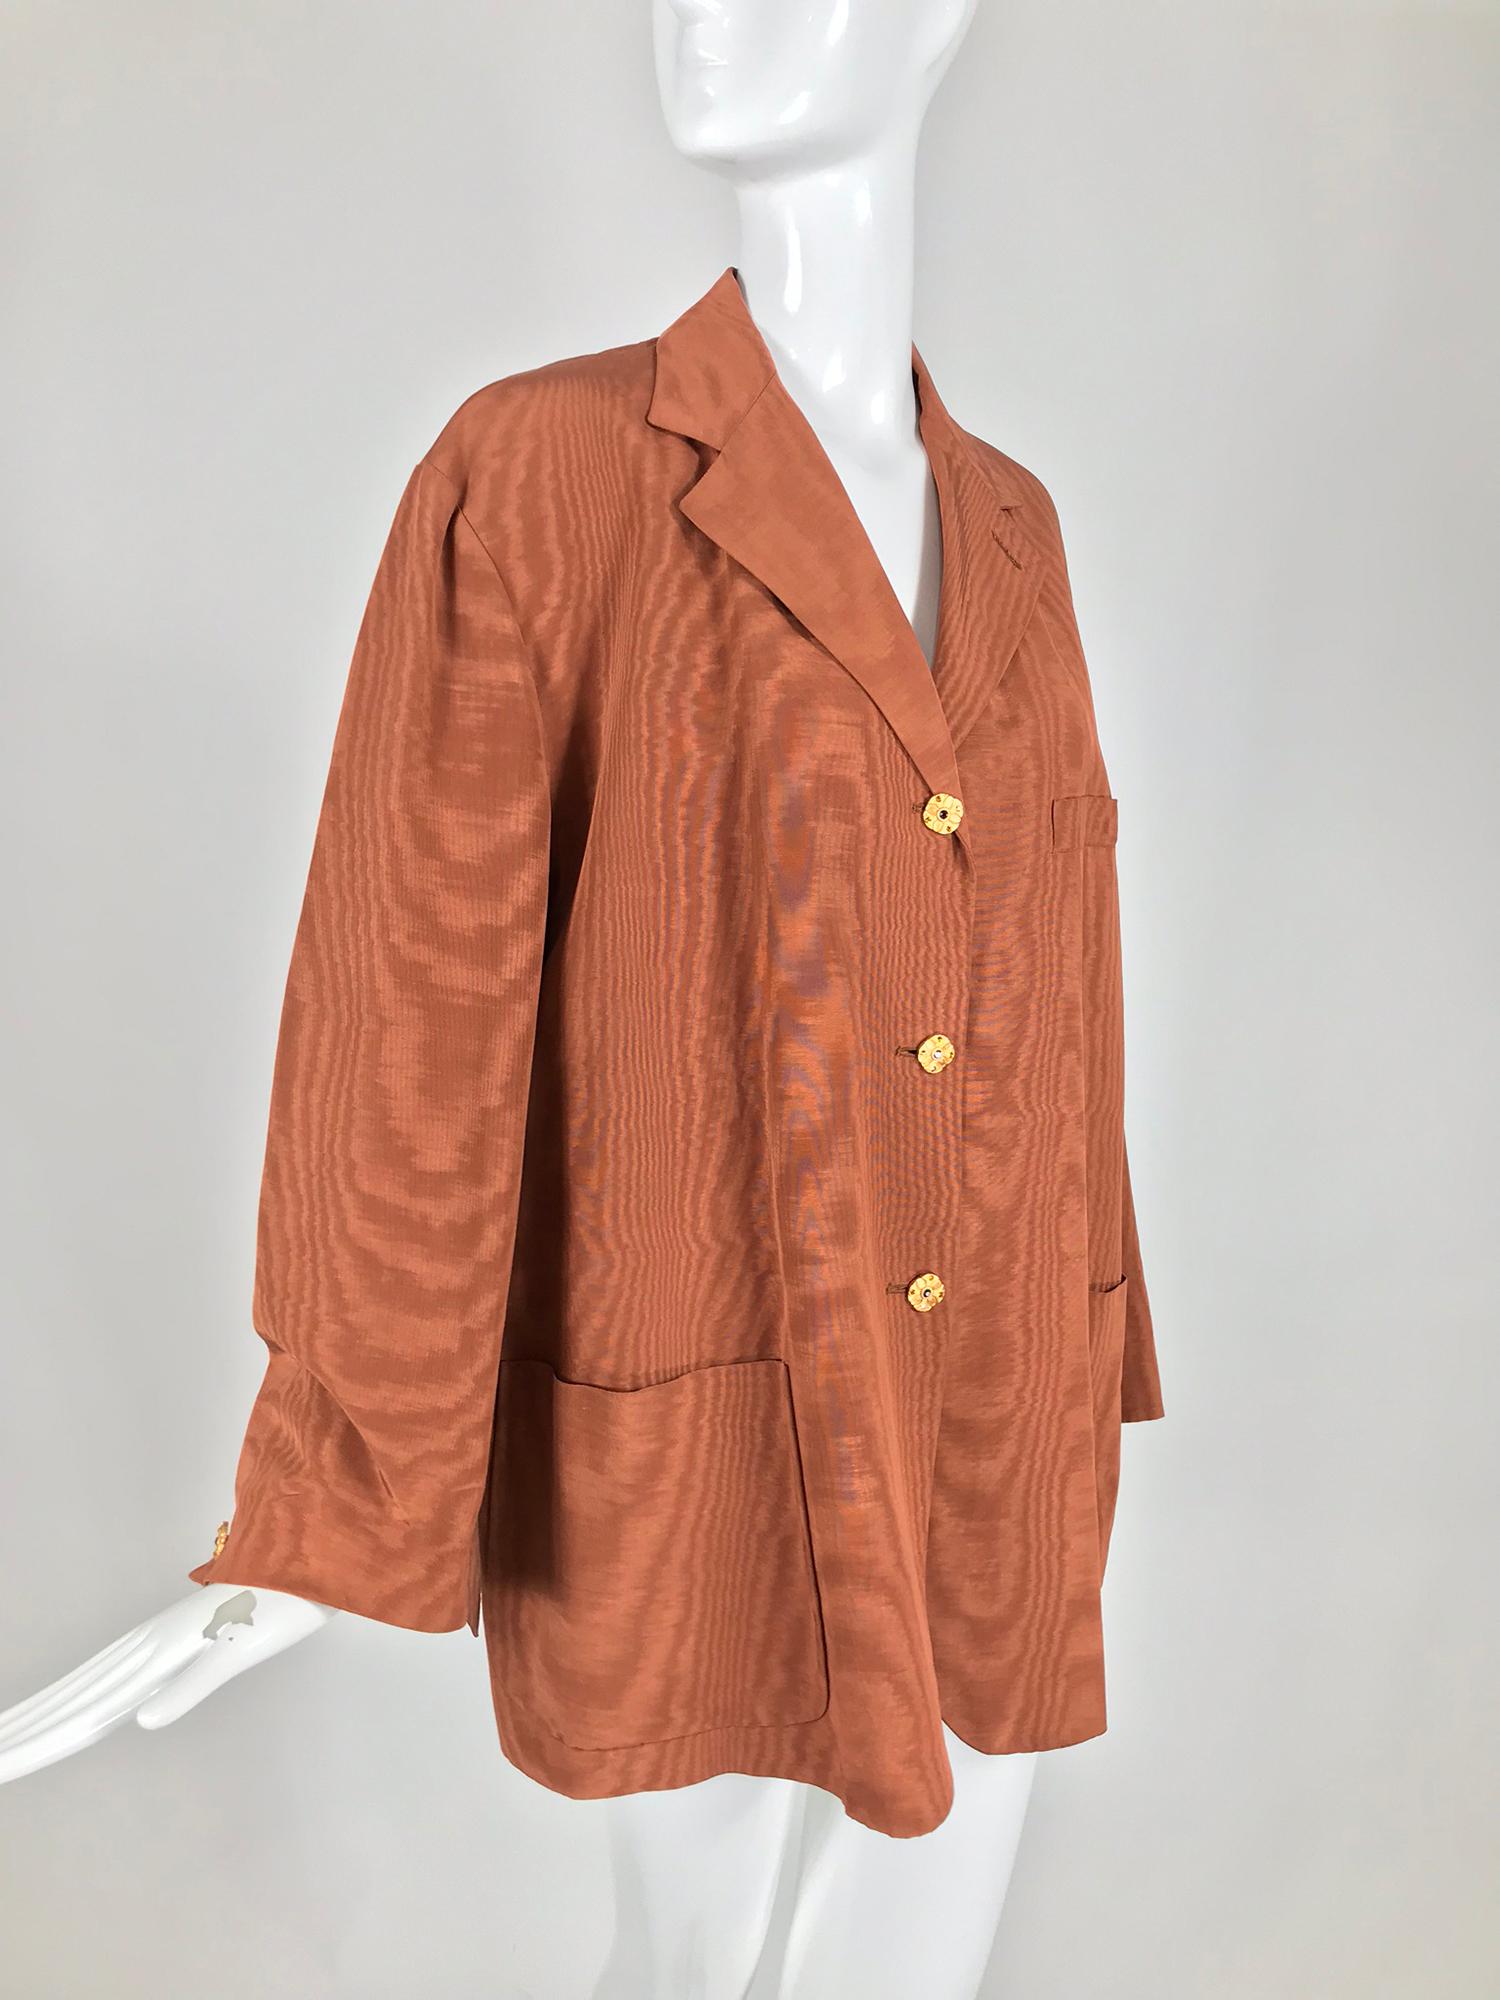 Romeo Gigli cocoa watered taffeta jacket from the 1980s. Romeo Gigli had his own fashion revolution in the 80s, jewel cloured layered looks were breath taking and tribal influenced, looks from this period are hard to find and collecting piece by